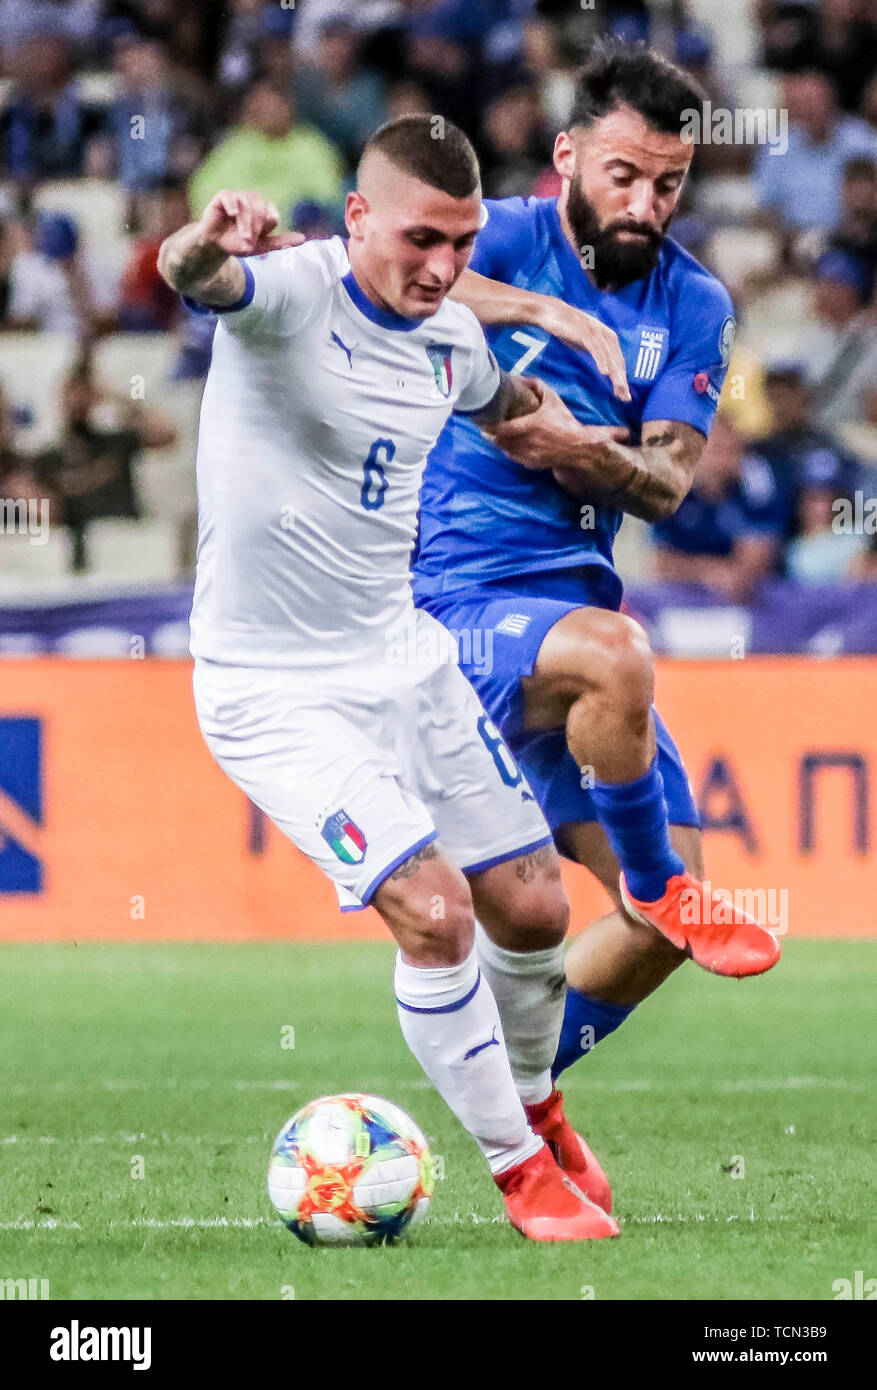 Athens Greece 8th June 19 Italy S Marco Verratti Competes During The Uefa Euro Group J Qualifier Soccer Match In Athens Greece June 8 19 Credit Panagiotis Moschandreou Xinhua Alamy Live News Stock Photo Alamy